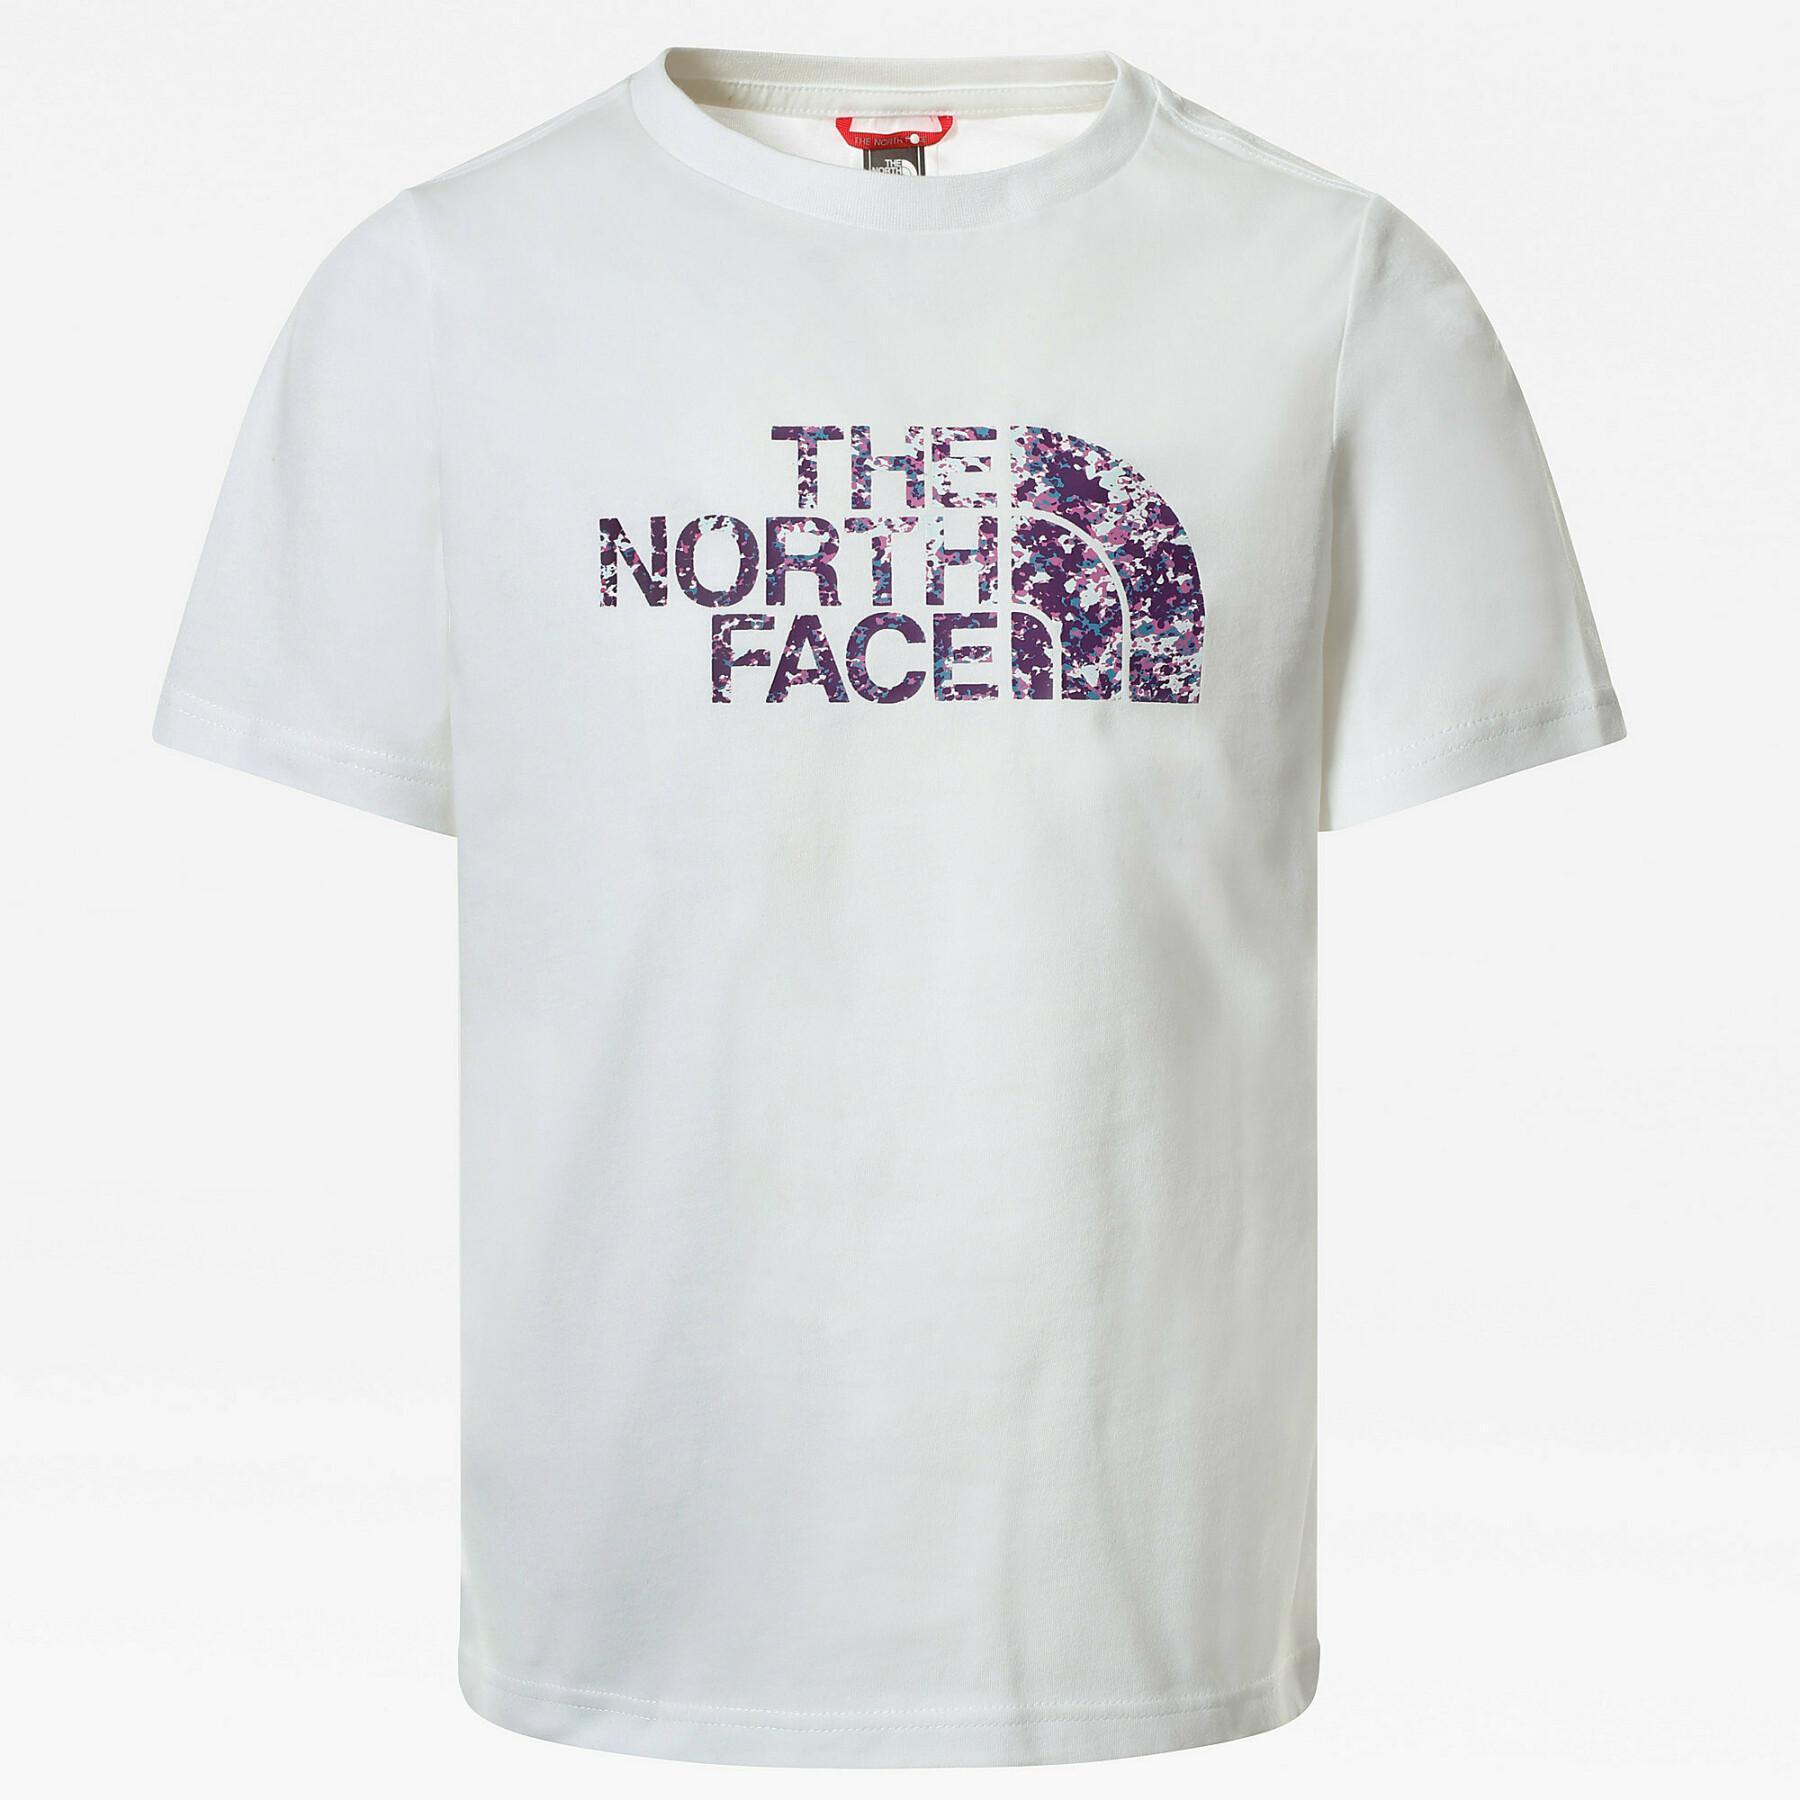 Meisjes-T-shirt The North Face Easy